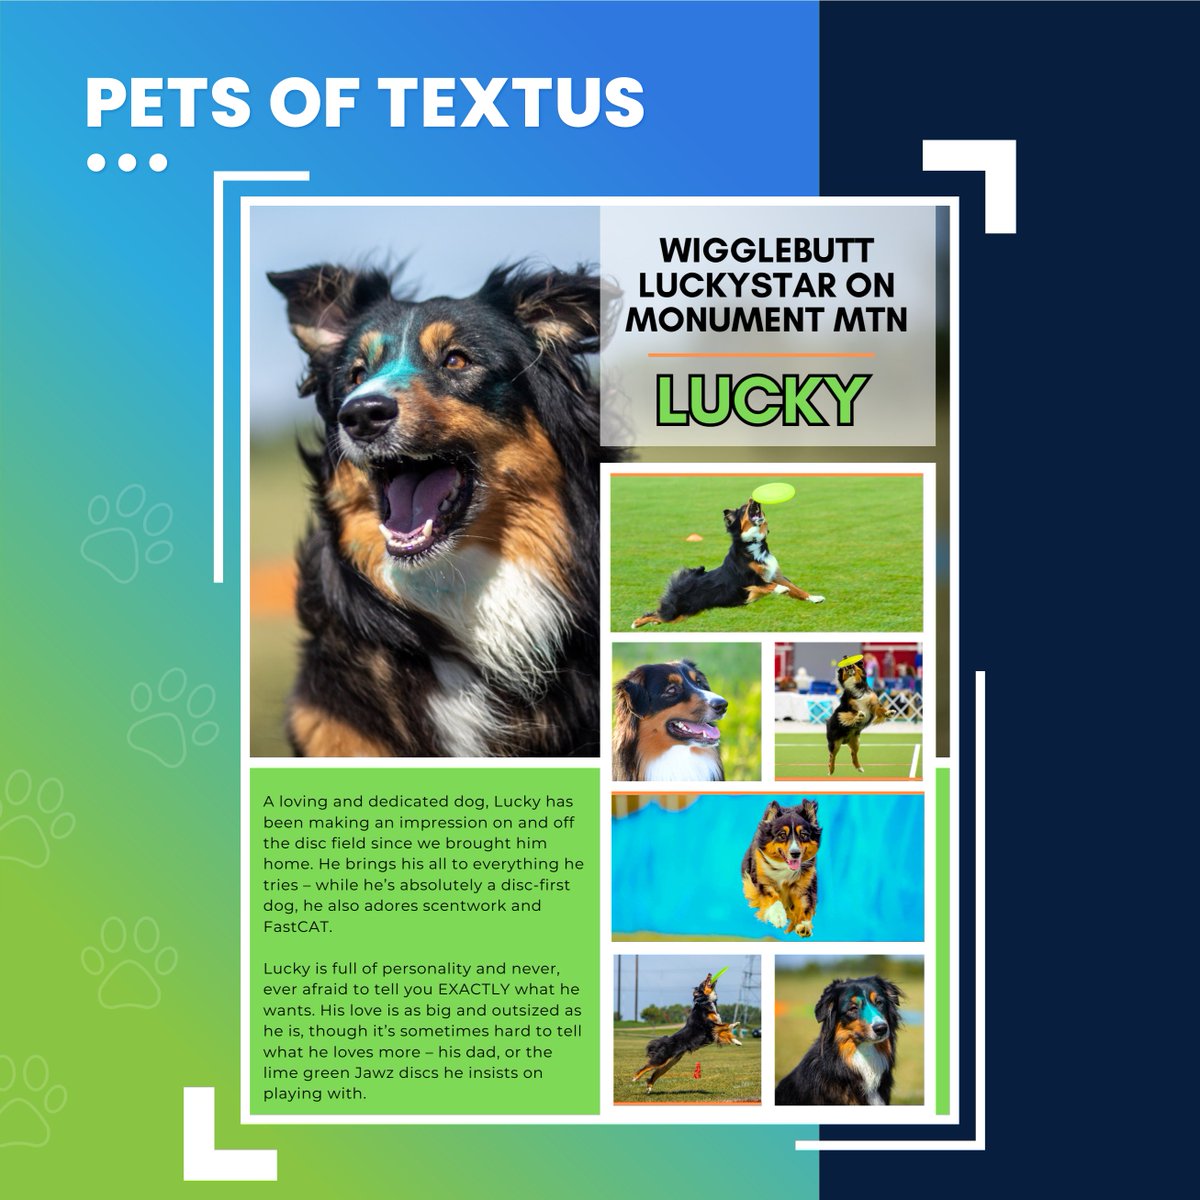 🐶 Pets of TextUs 🐱

This week's featured pet is Andrew's dog, Lucky! He was born to play sports. Andrew's family has taken him all around the country to compete for disc and has been on ESPN! 🏆

#textus #pets #animals #dogoftheday